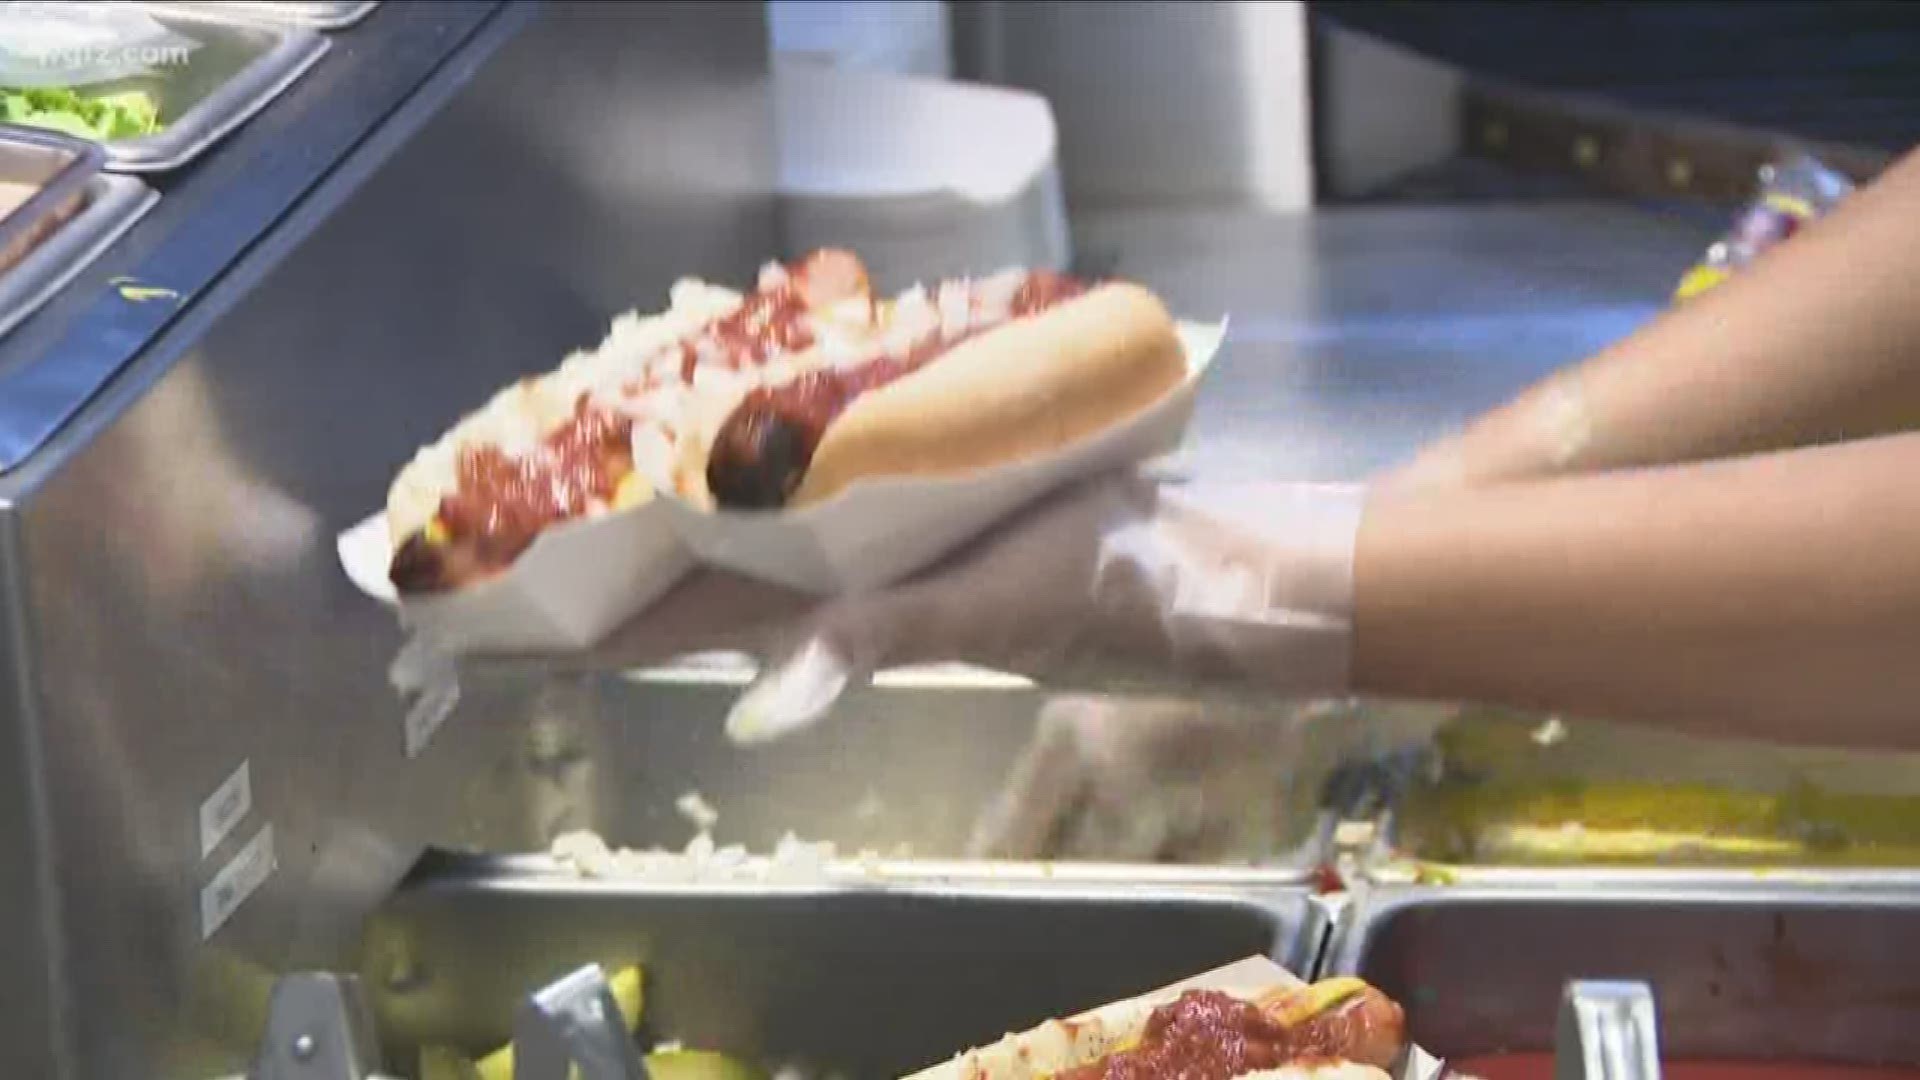 you can buy a regular hot dog from Ted's for just 93-cents.